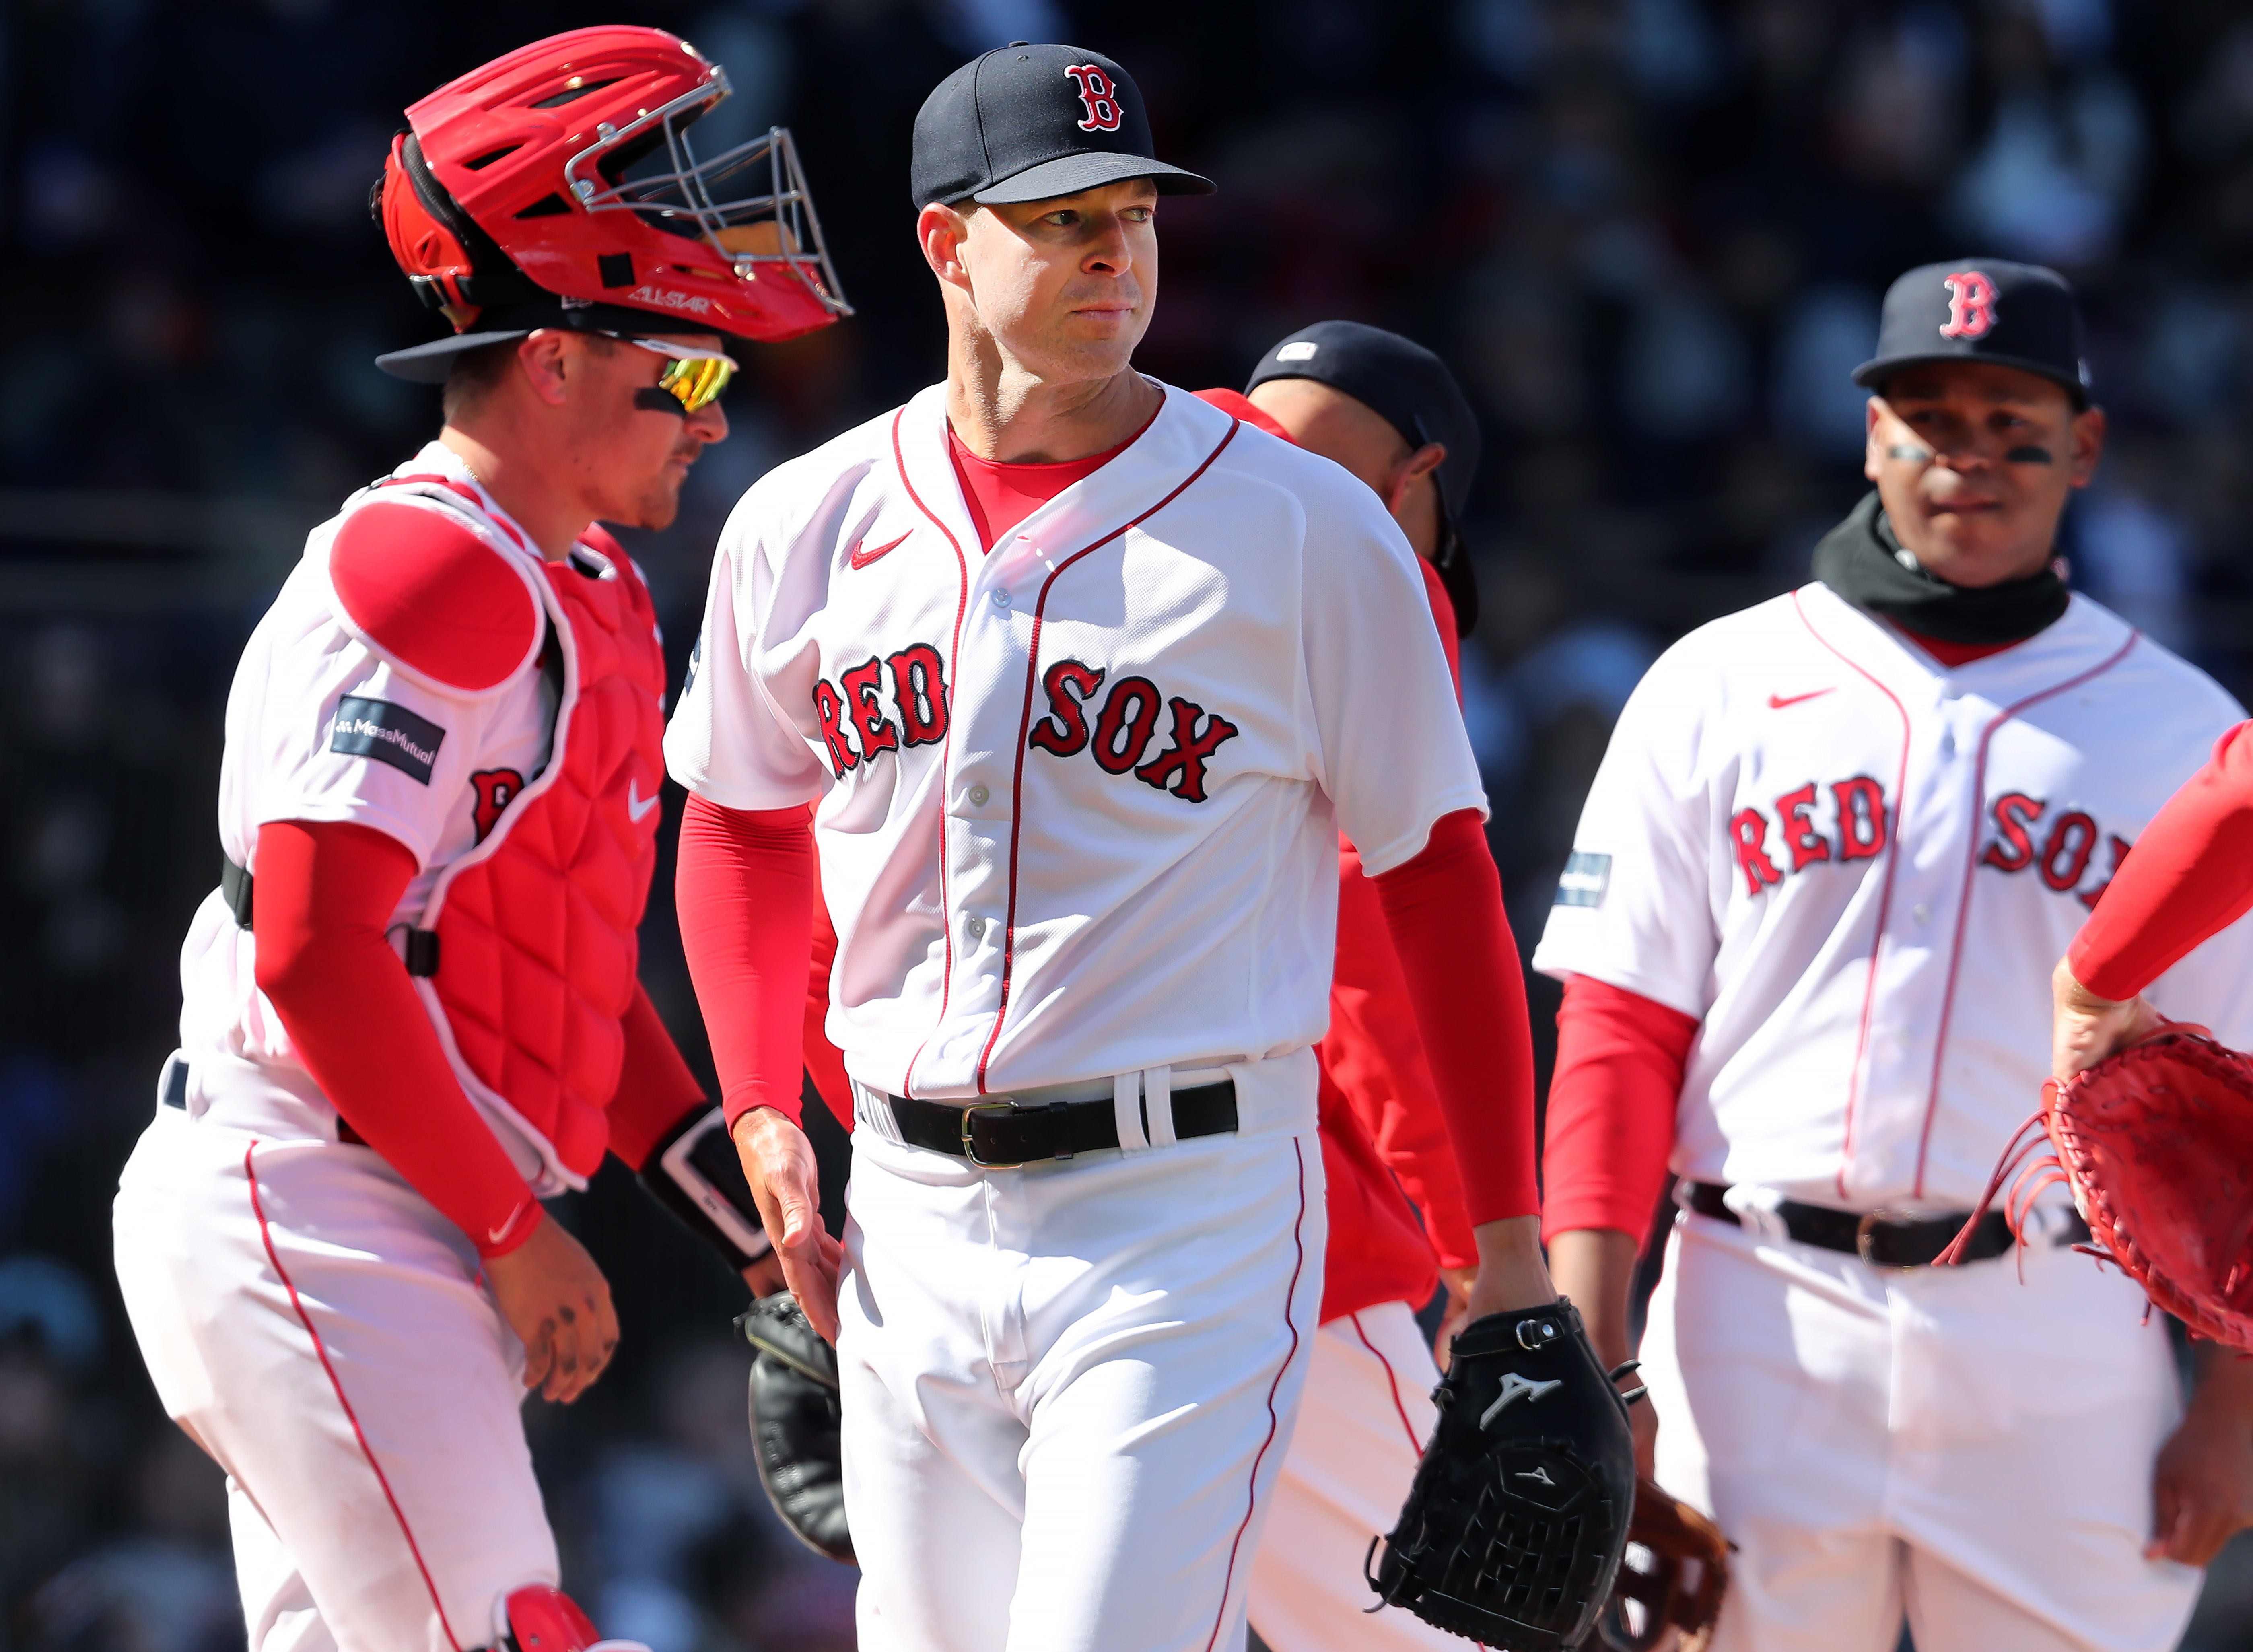 Boston Red Sox schedule, roster and 2022 predictions